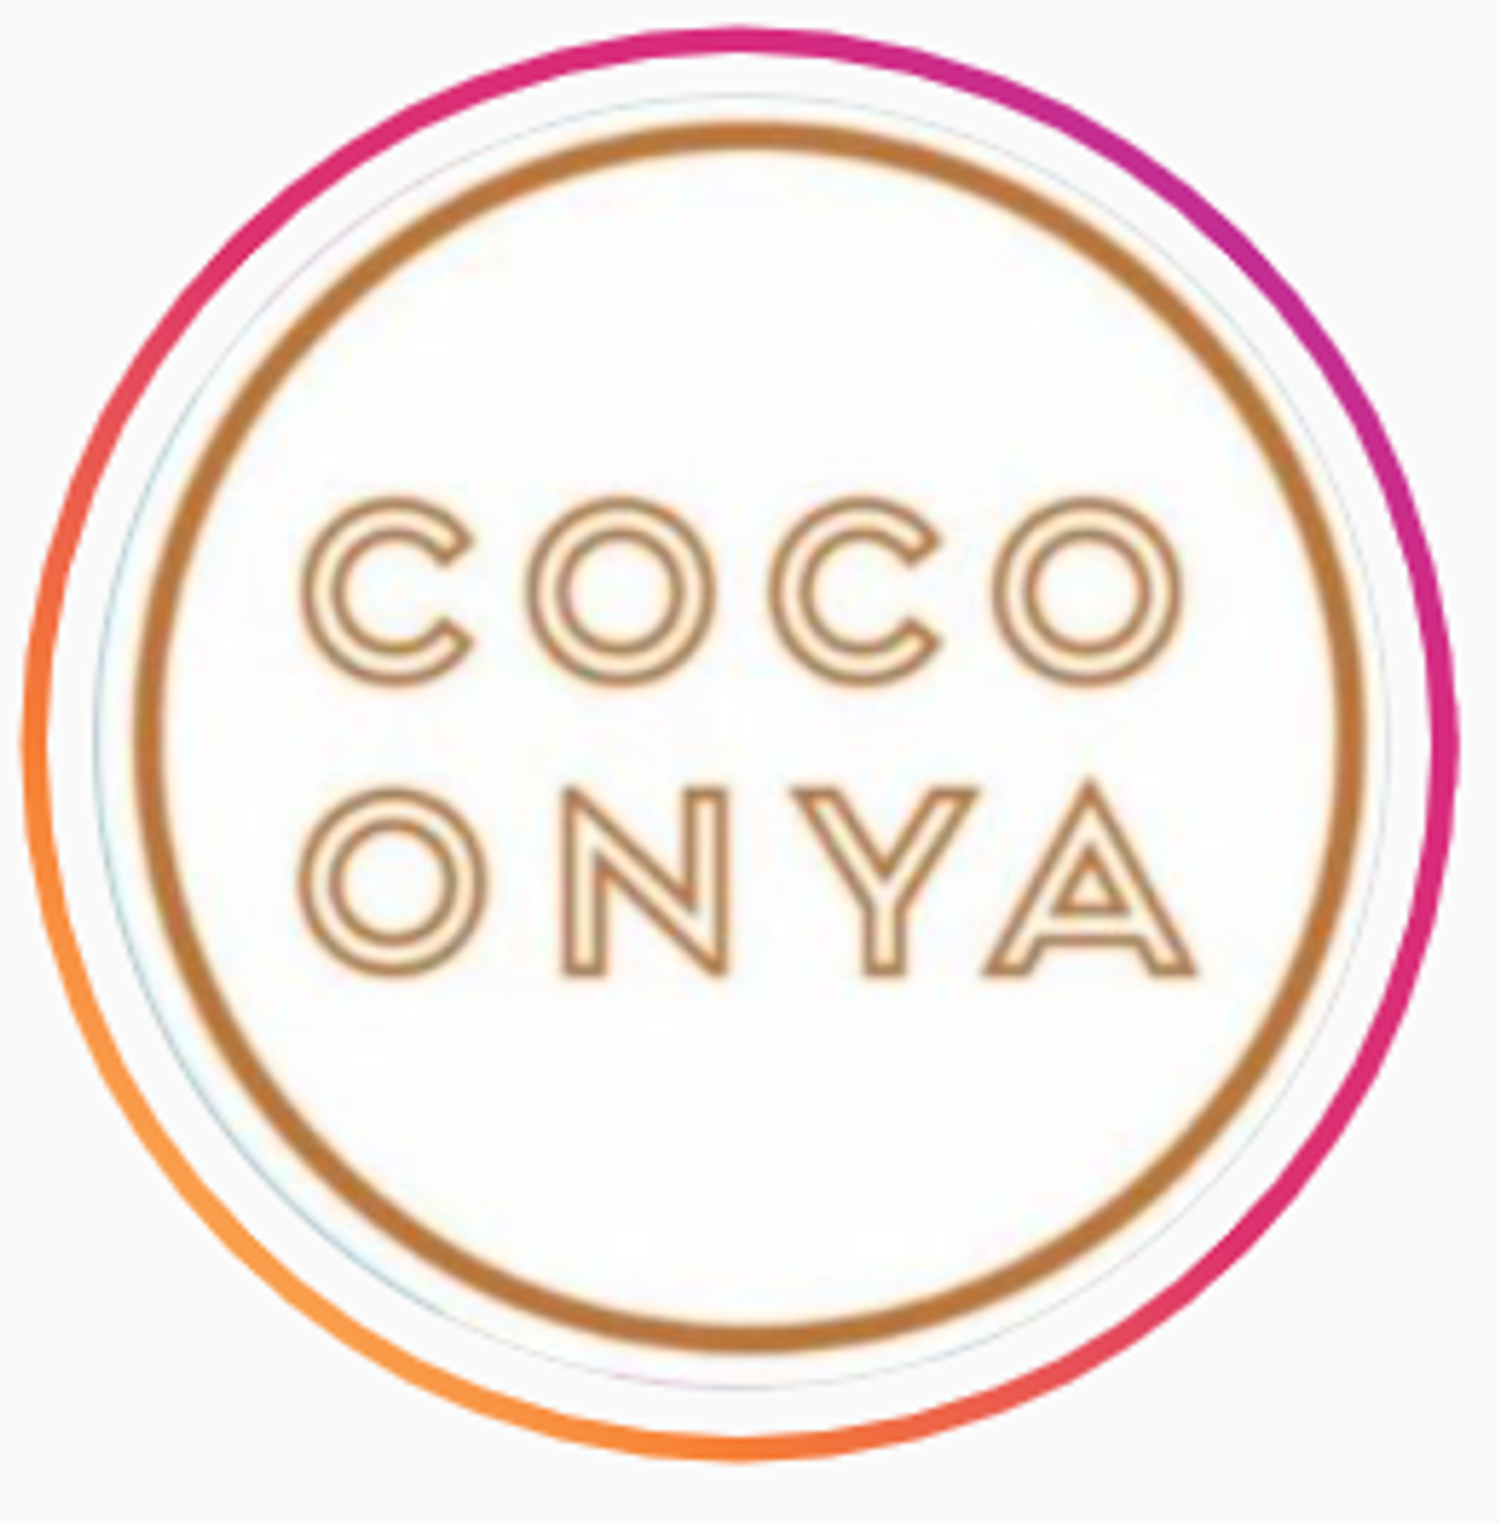 COCO ONYA - FURTHER REVIEWS VISIT OUR INSTAGRAM @coco.onya